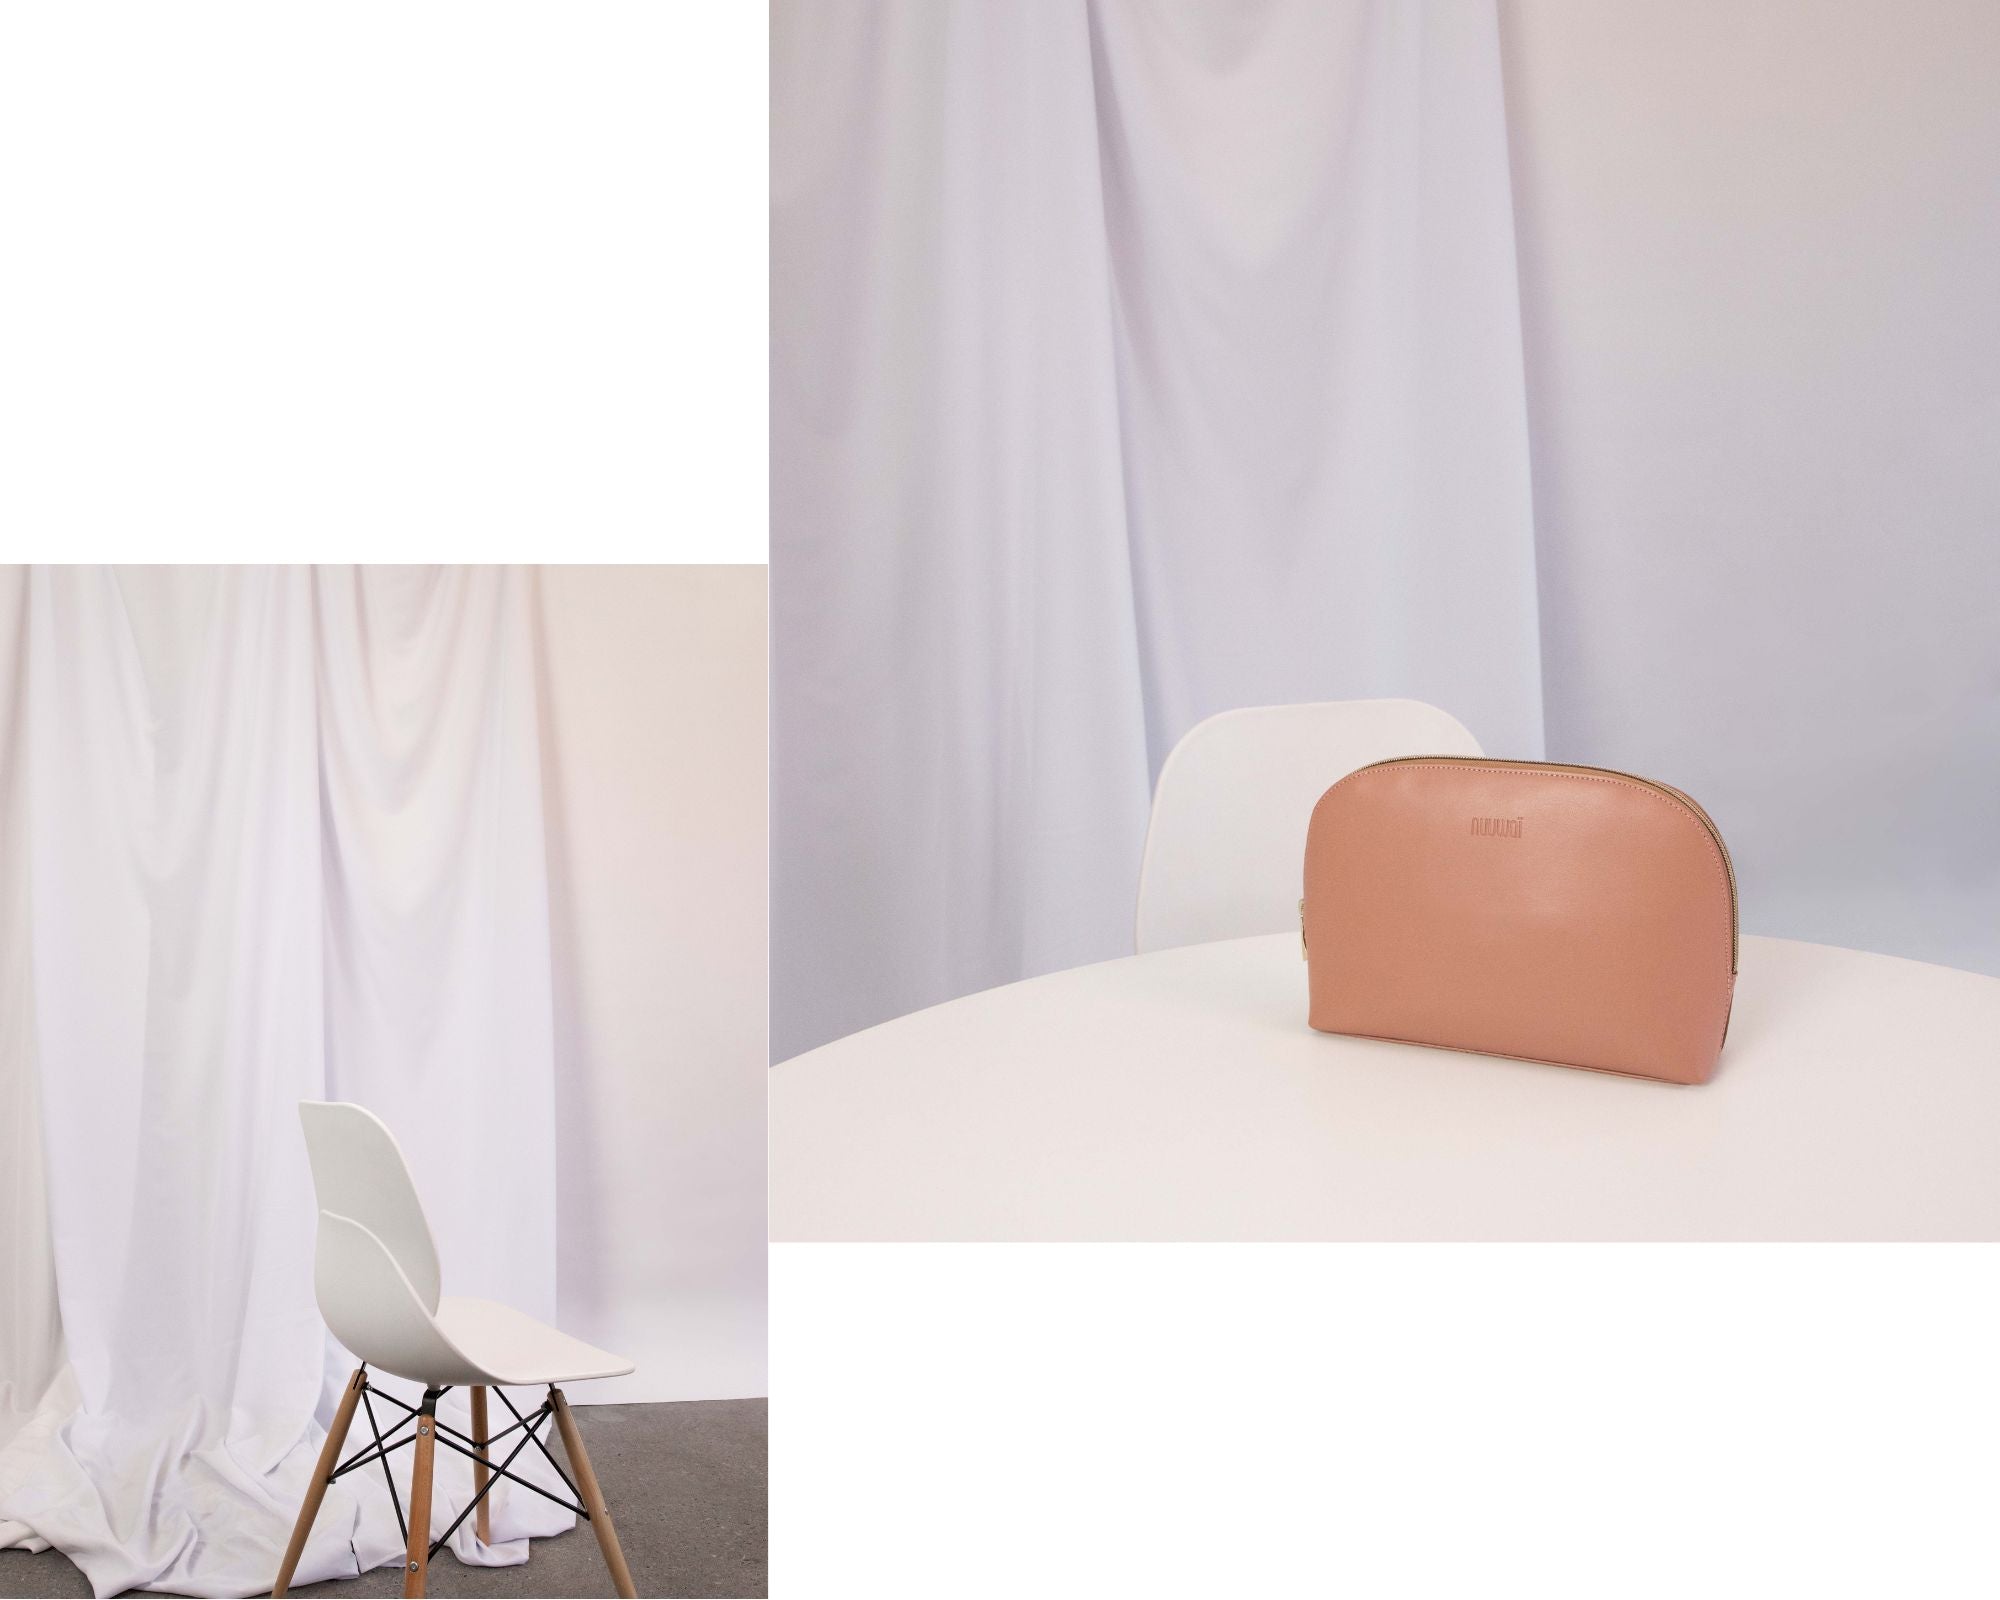 A makeup bag on a table and a white chair